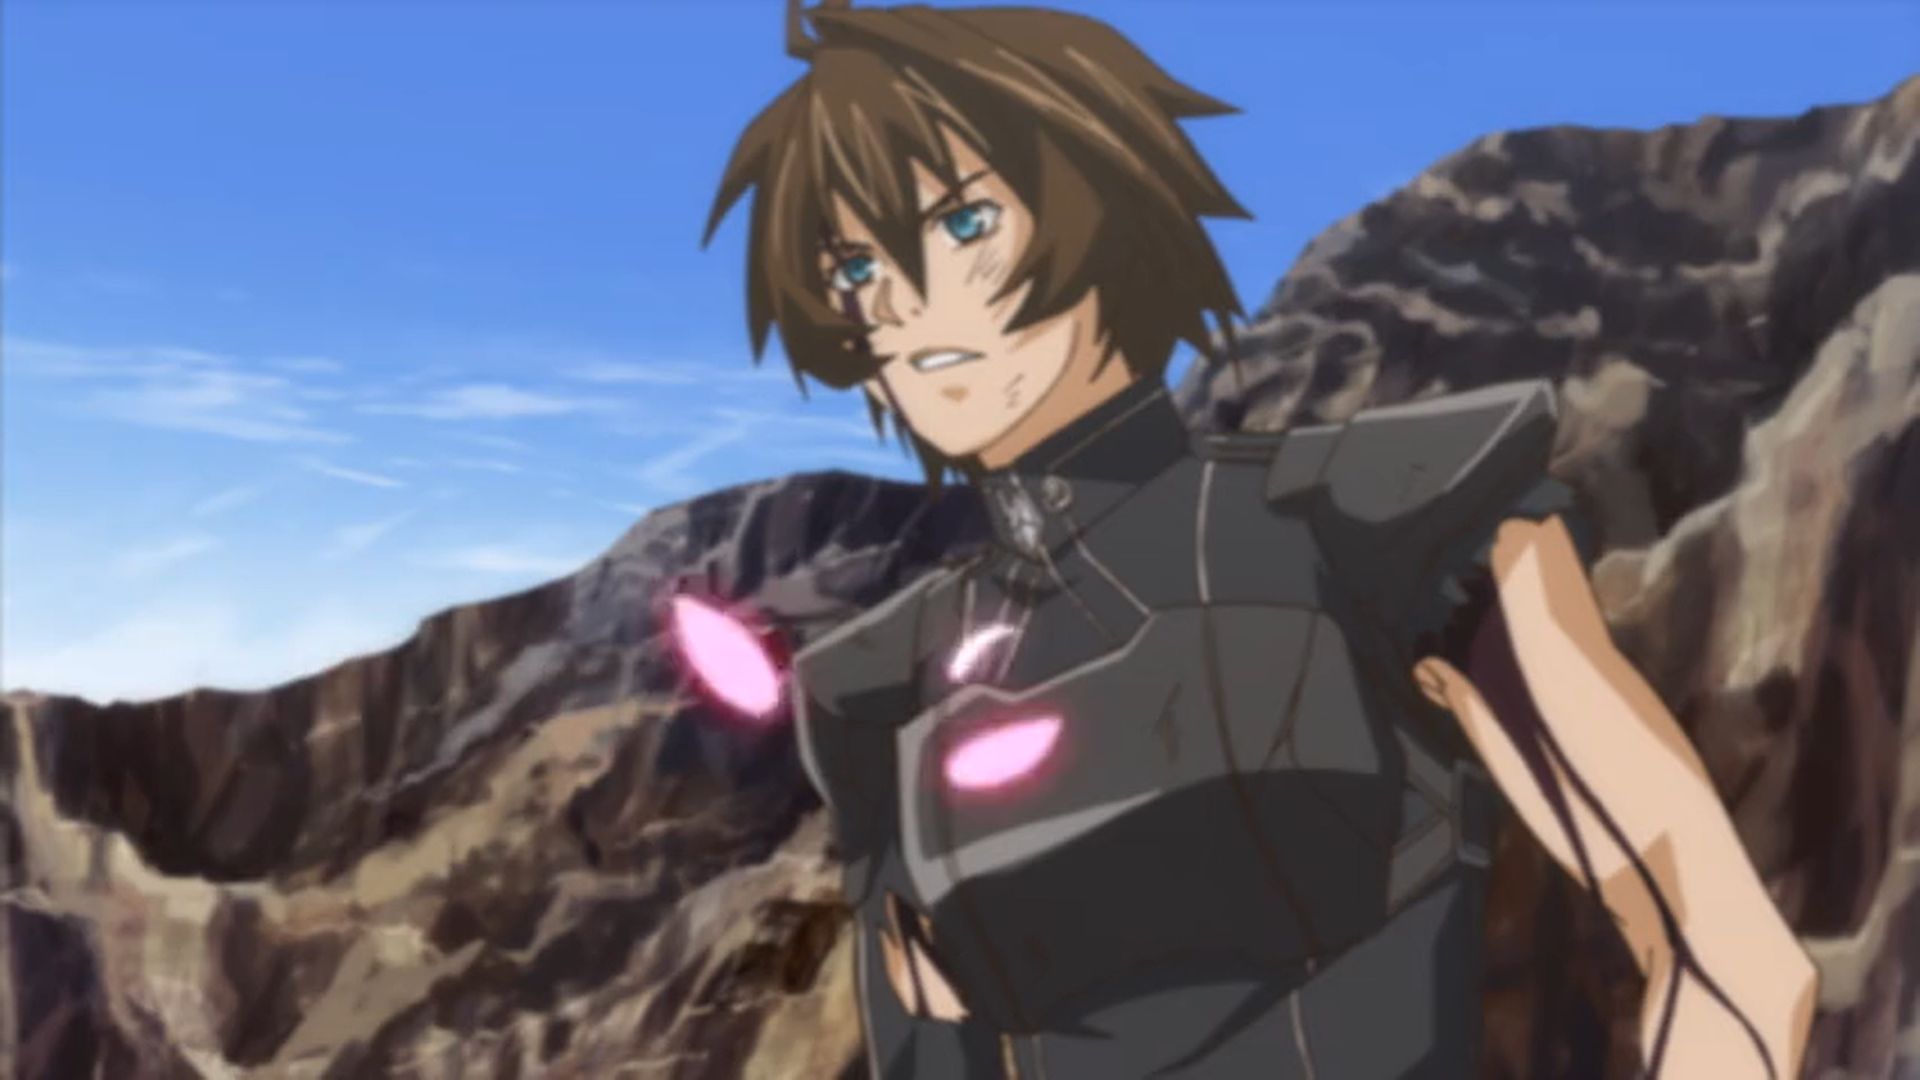 Chrome Shelled Regios is one of the best anime with overpowered main character. 